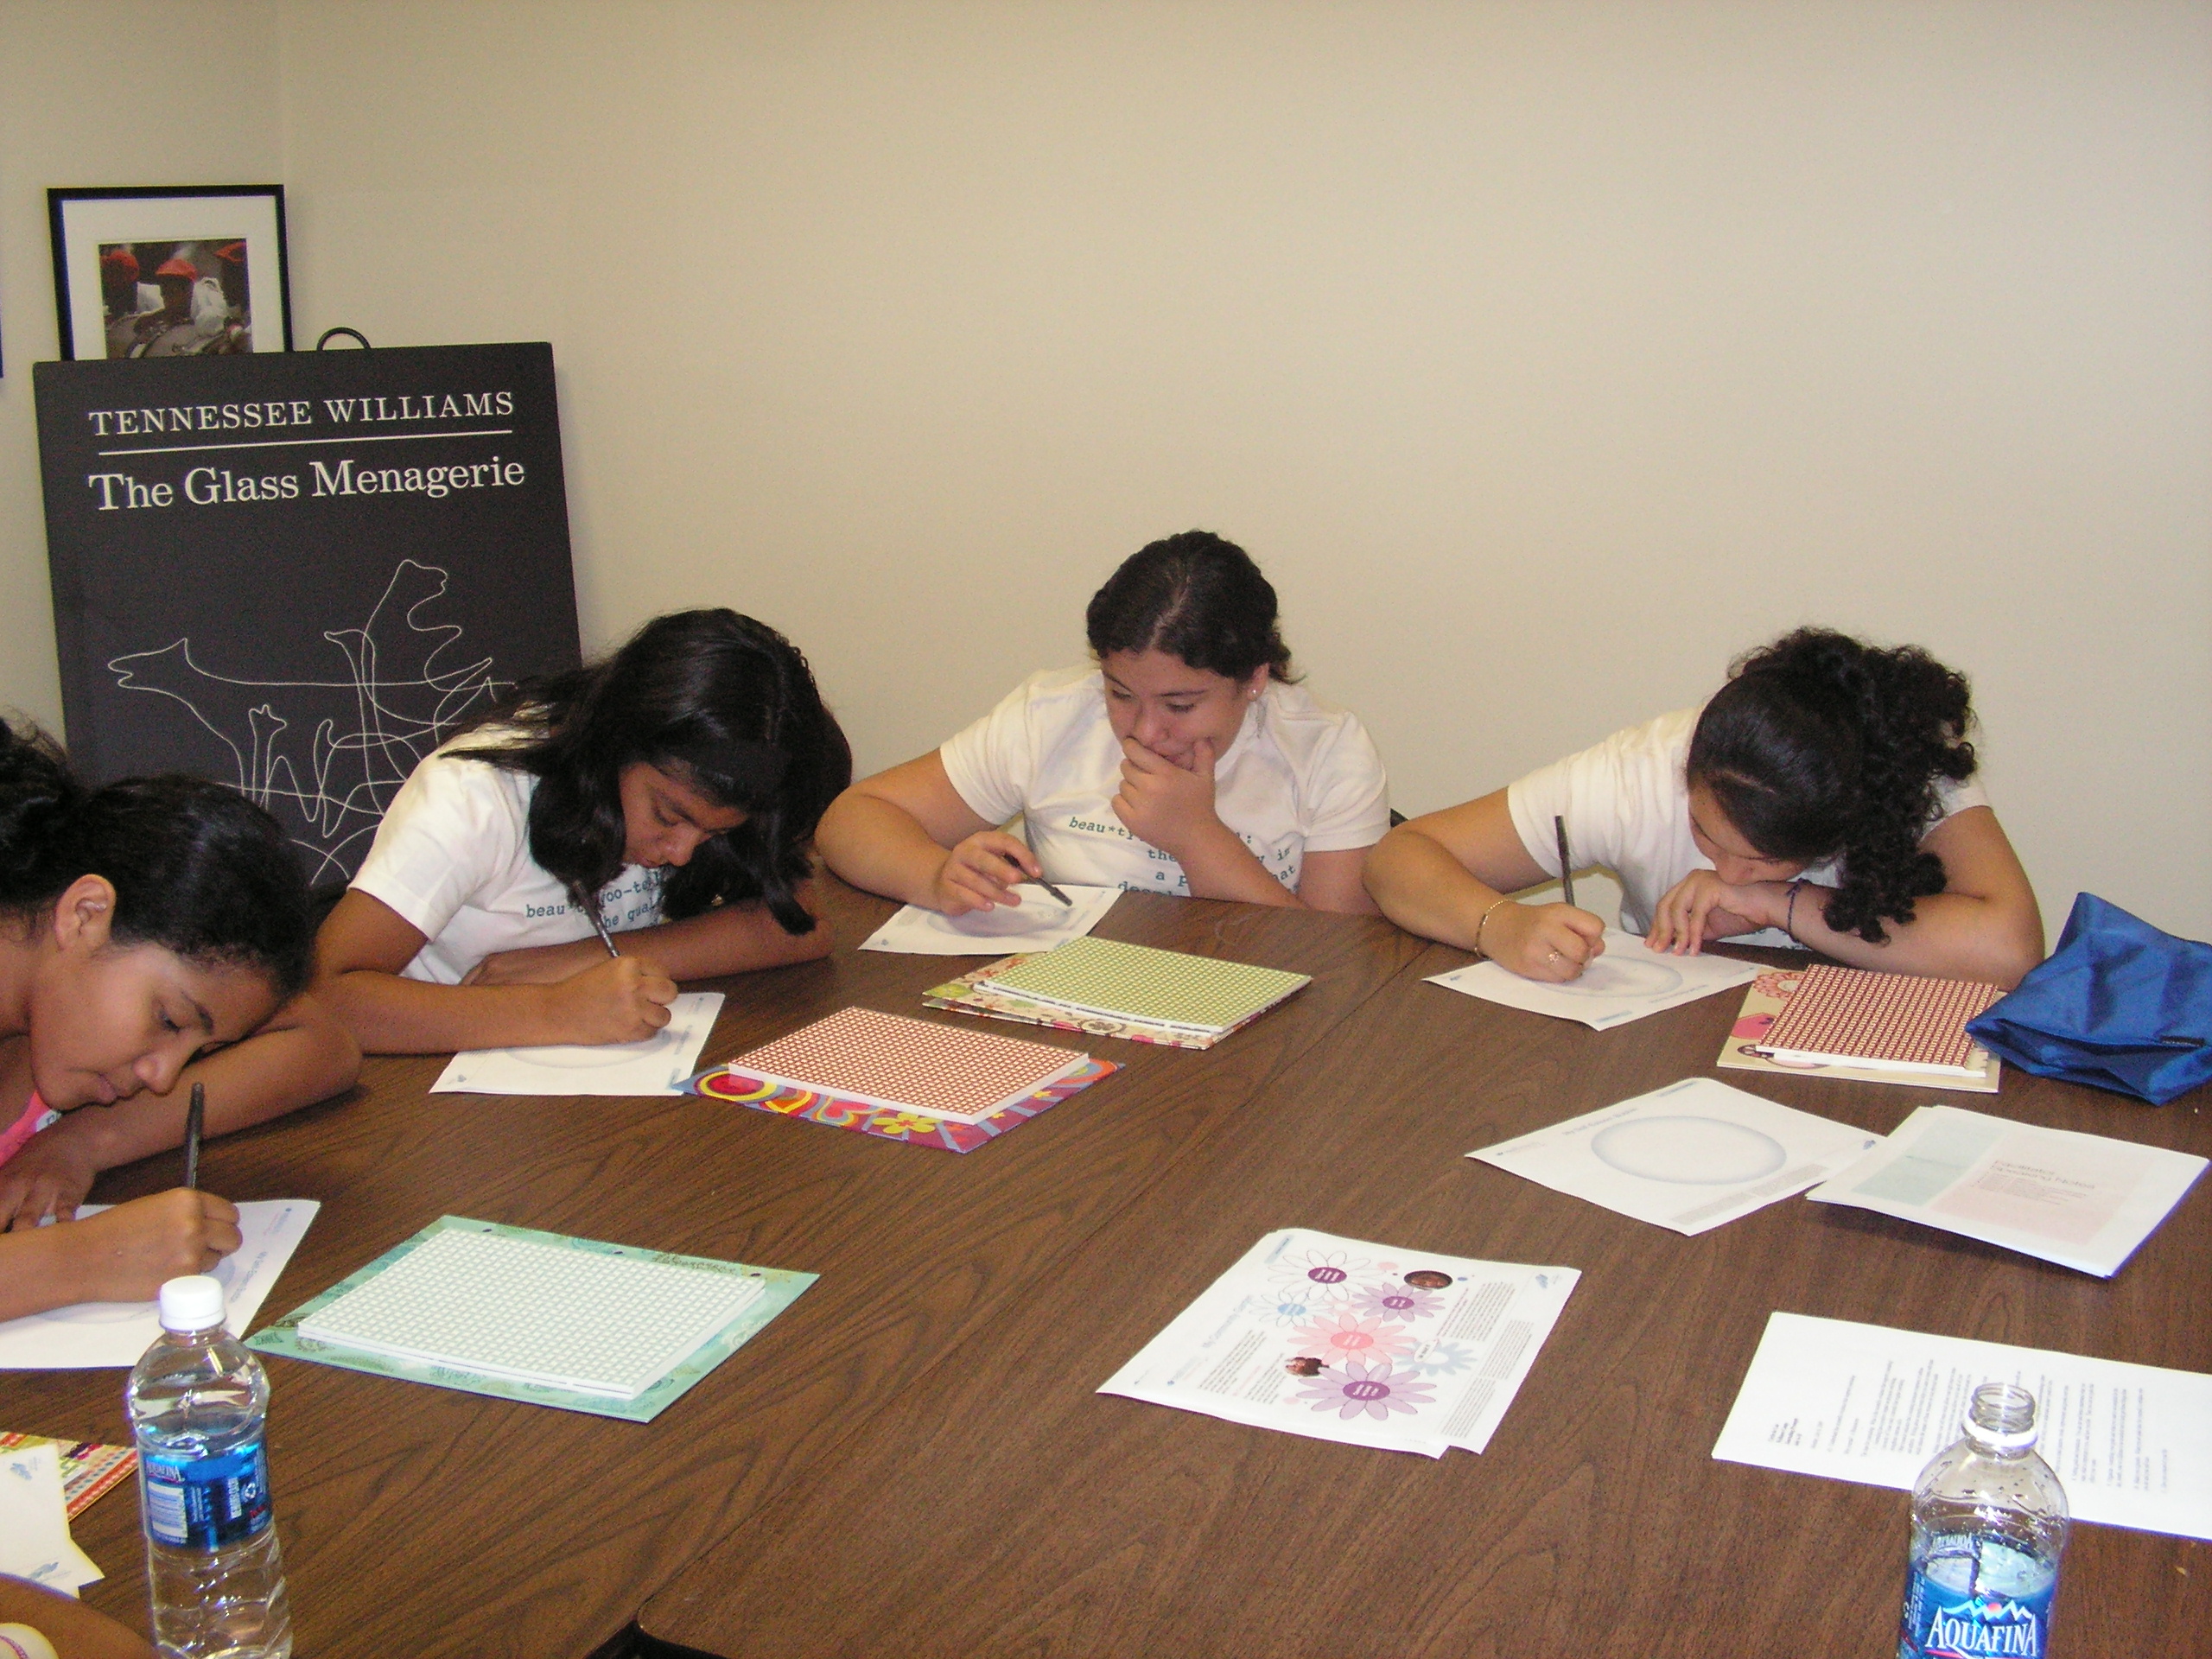 The girls work on some of the exercises during the body image workshop.